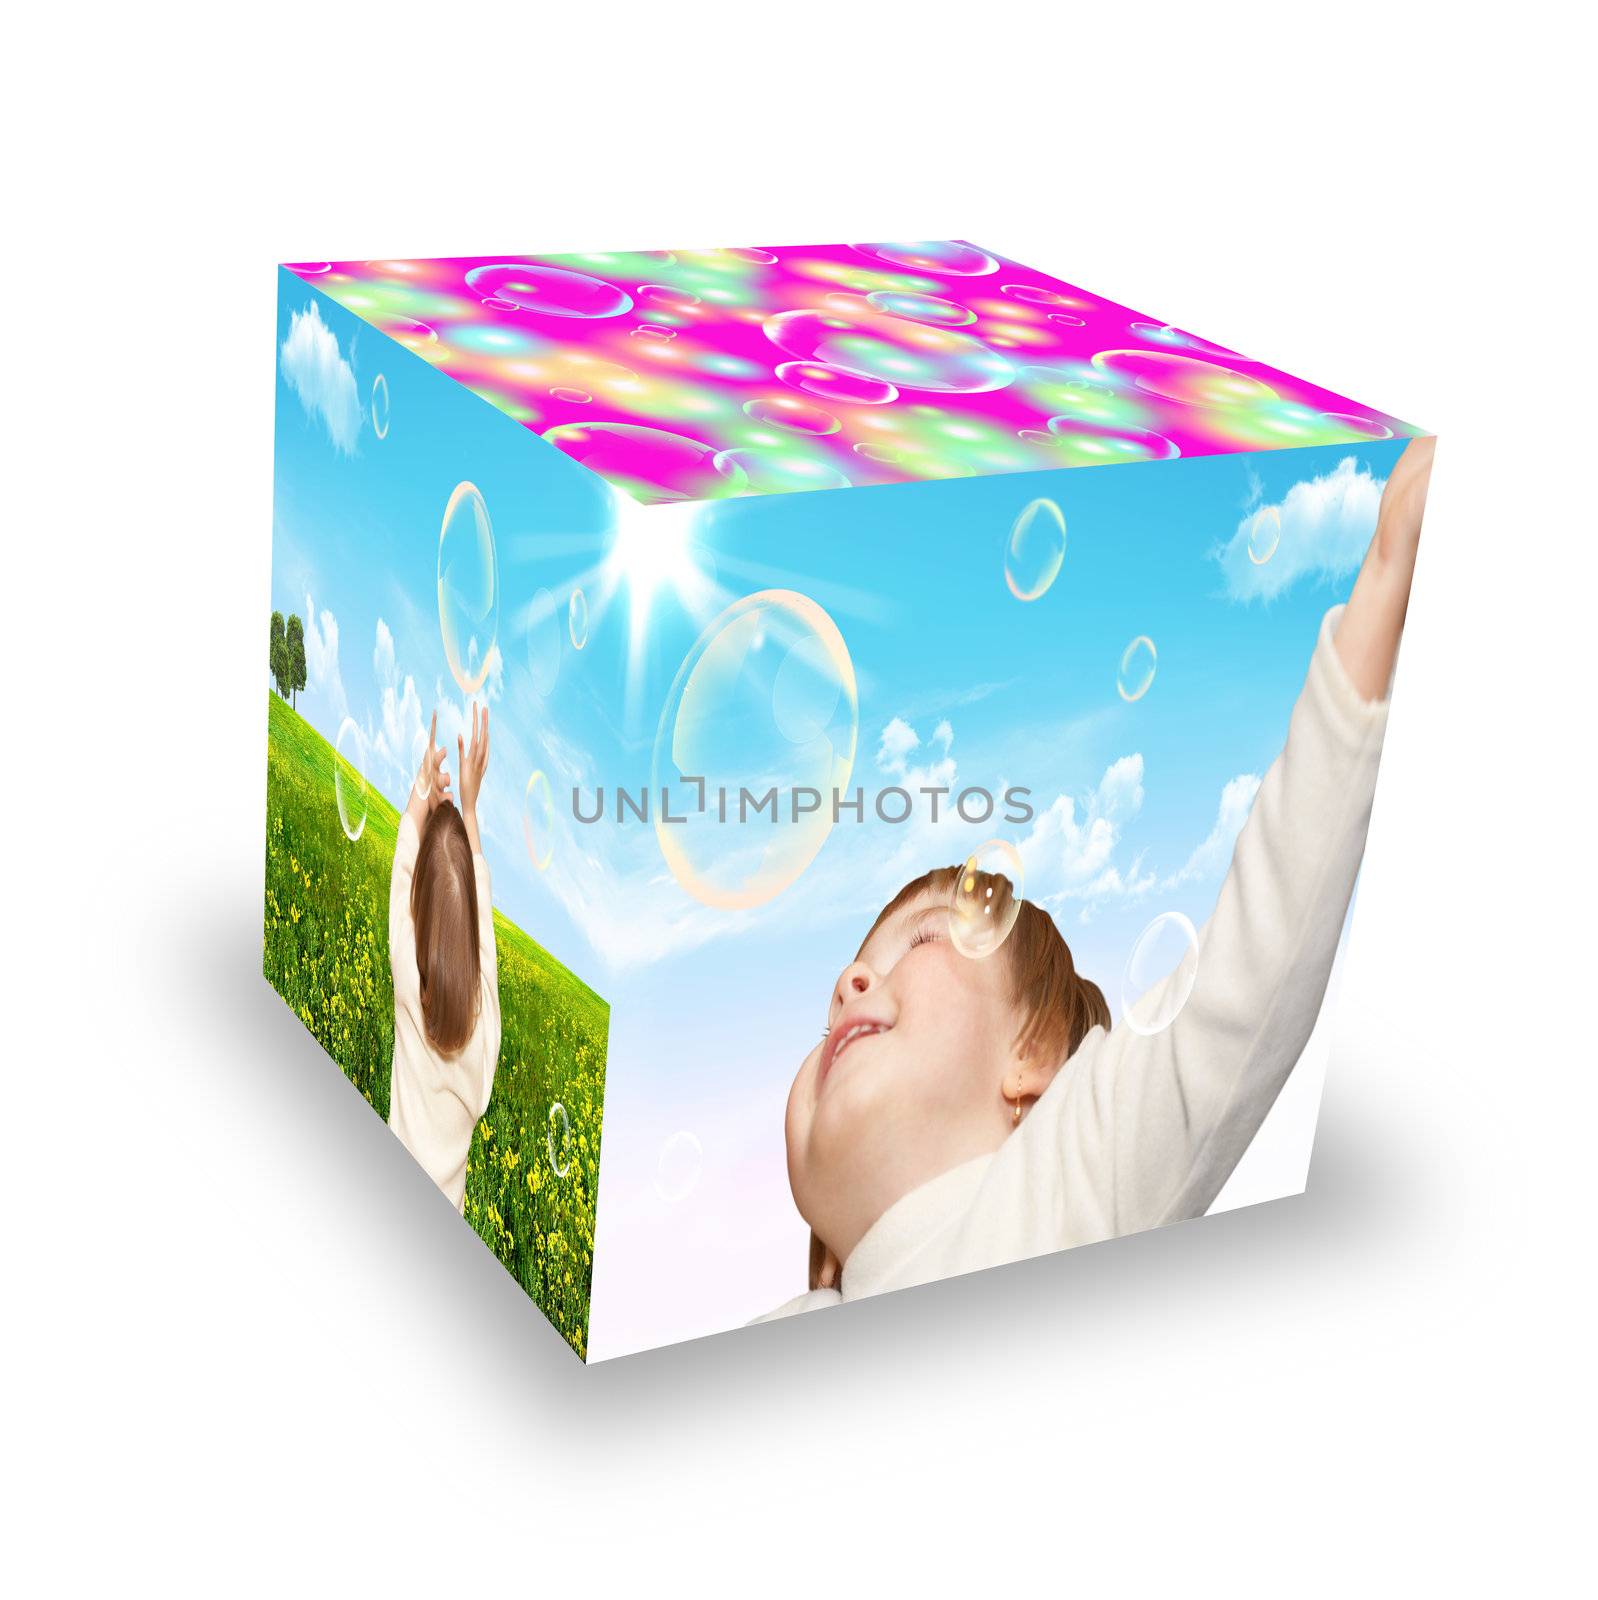 The small girl plays with soap bubbles. Cube